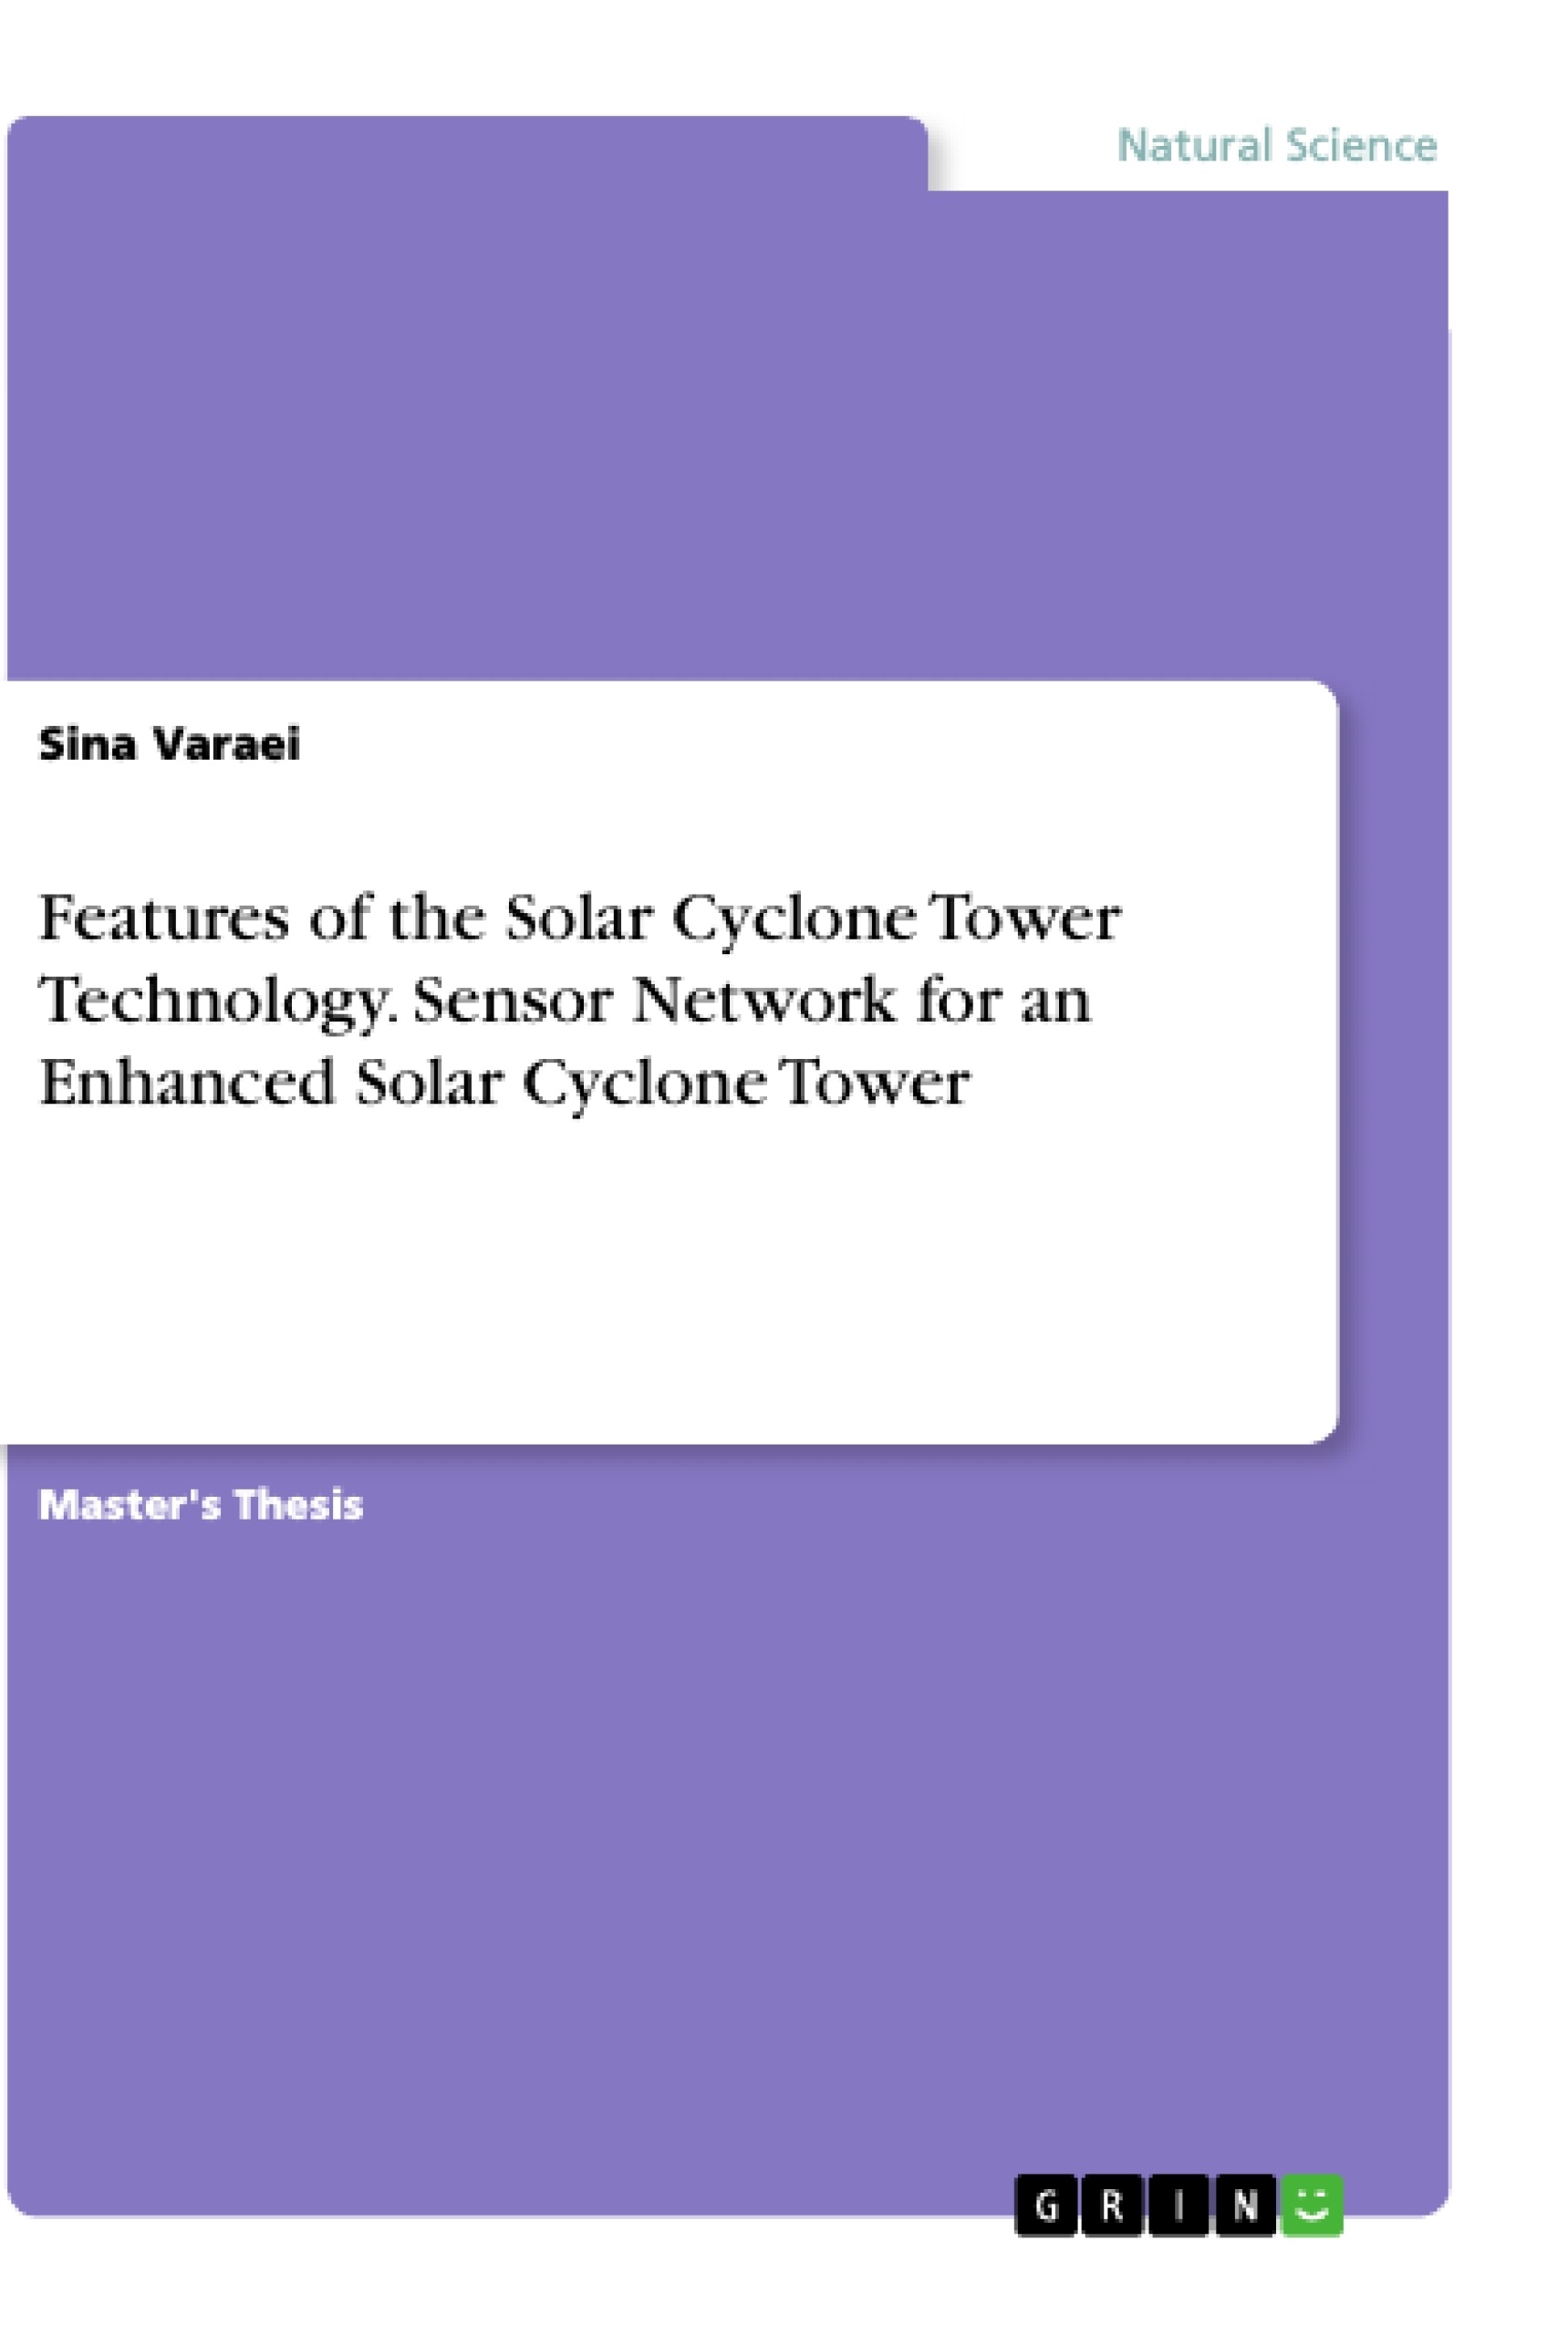 Title: Features of the Solar Cyclone Tower Technology. Sensor Network for an Enhanced Solar Cyclone Tower